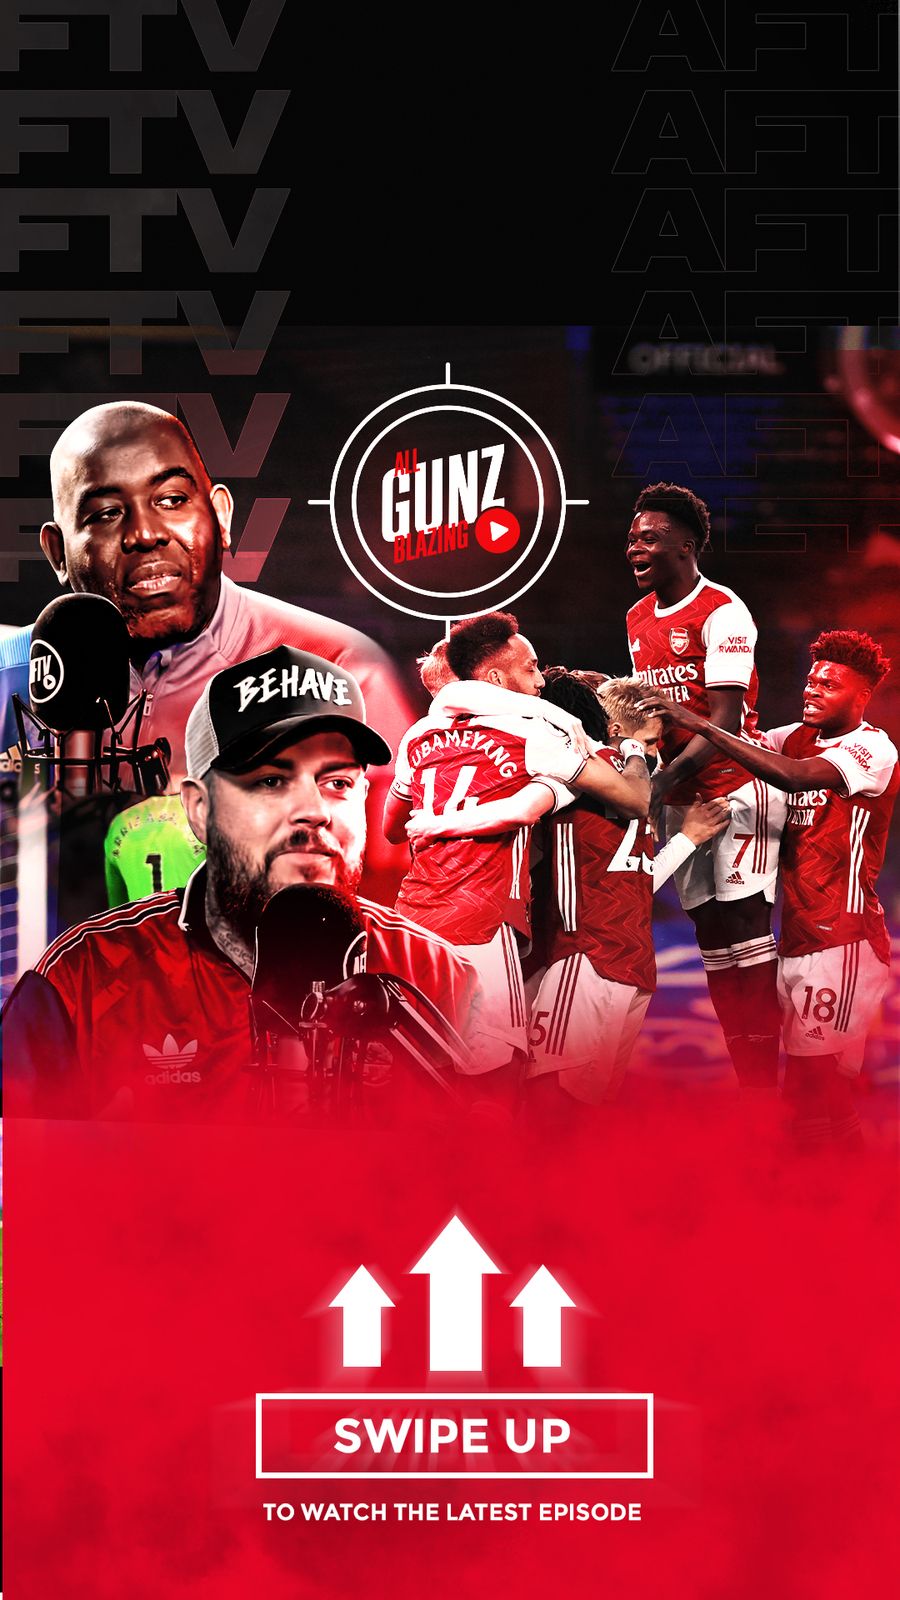 S3 Ep97: Every Arsenal Player Rated For This Season 2020/21 | All Gunz Blazing Podcast Feat DT